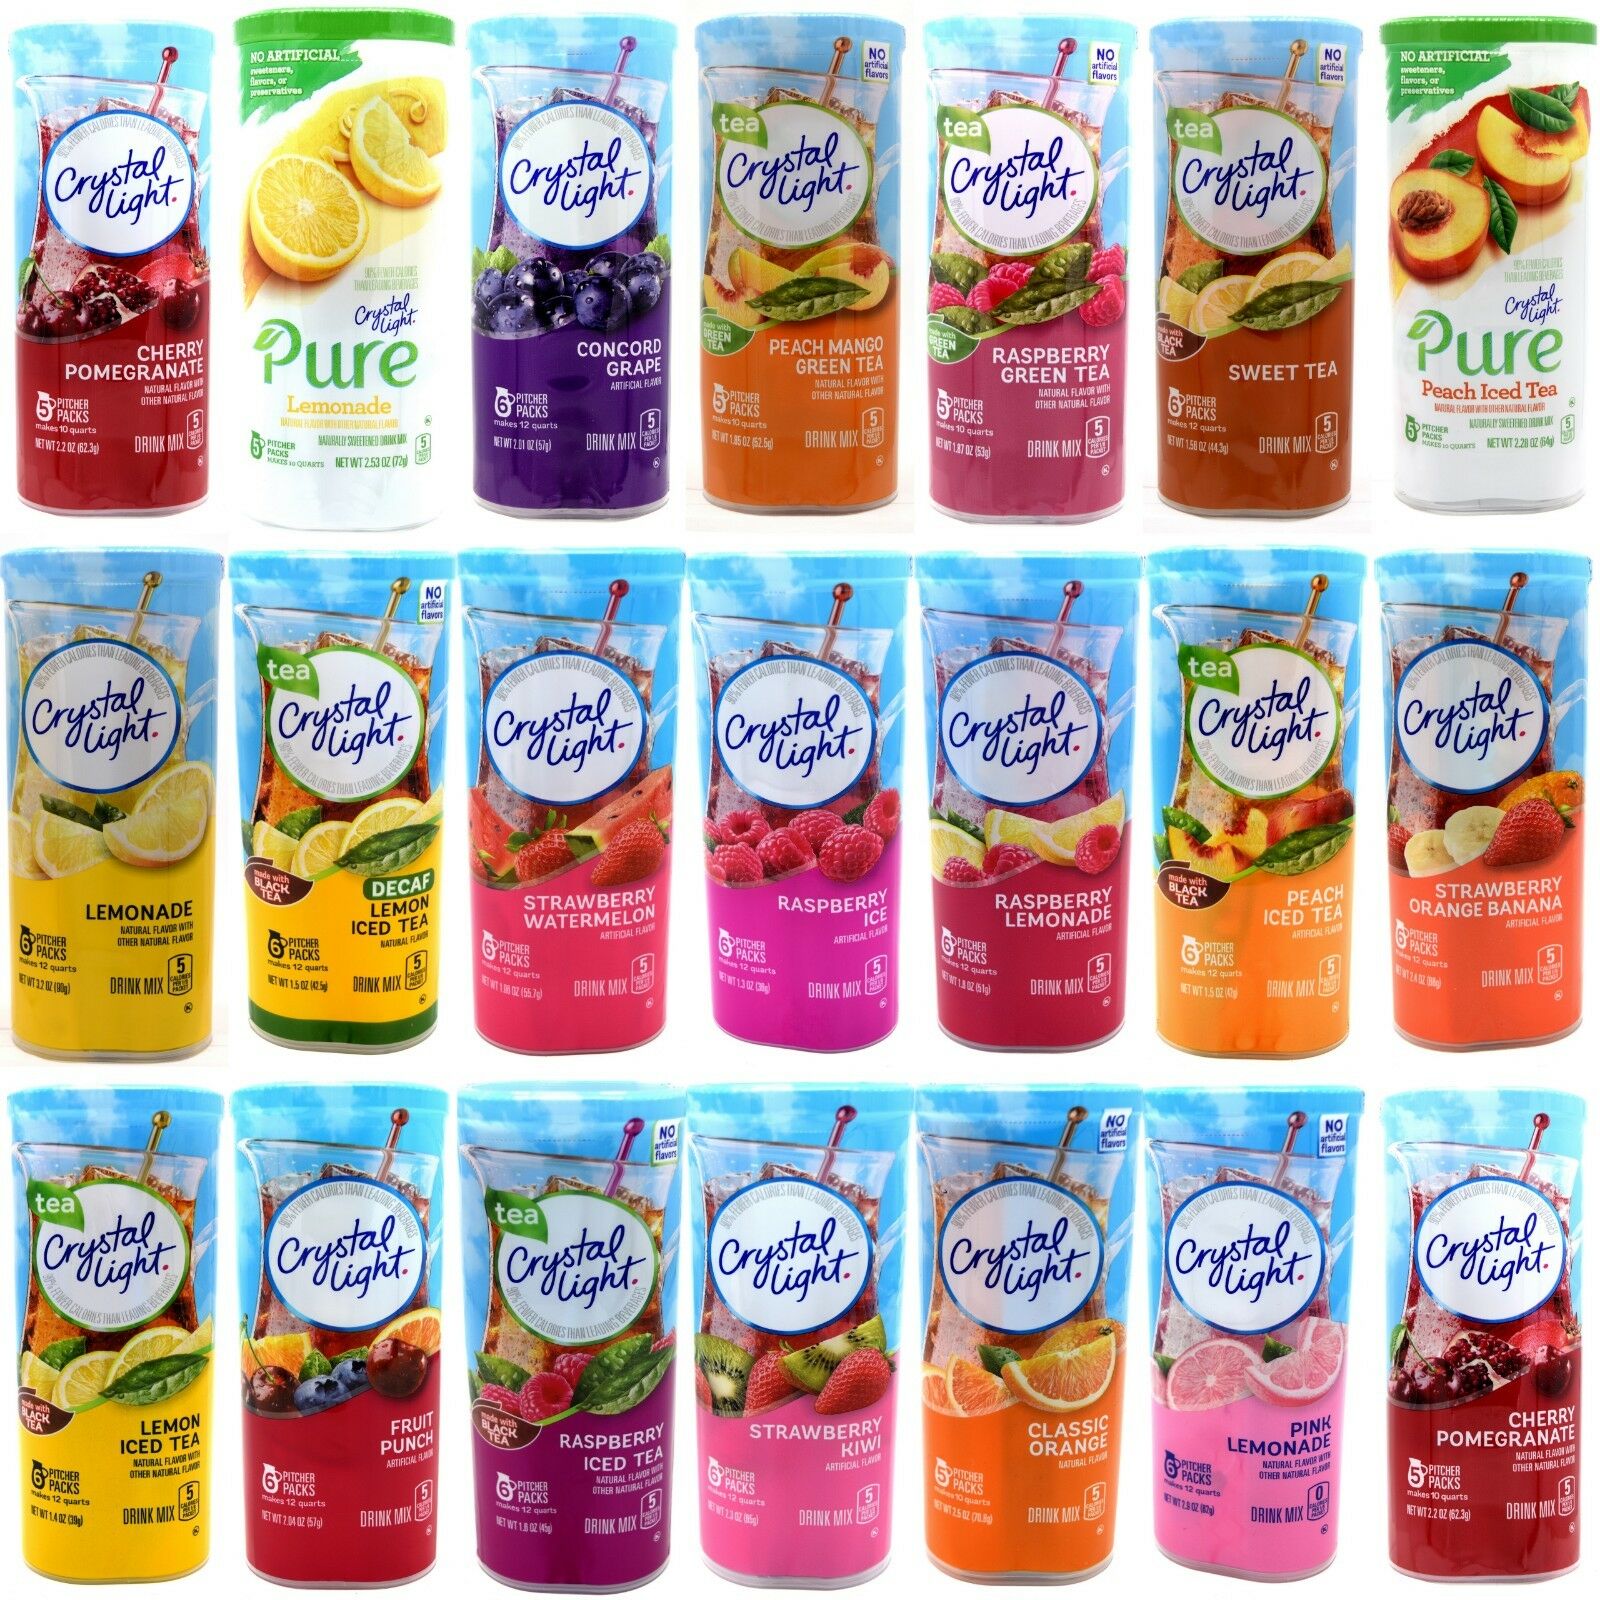 Crystal Light 10-quart Or 12-quart Canister Many Flavors Buy More Save Up To 30%